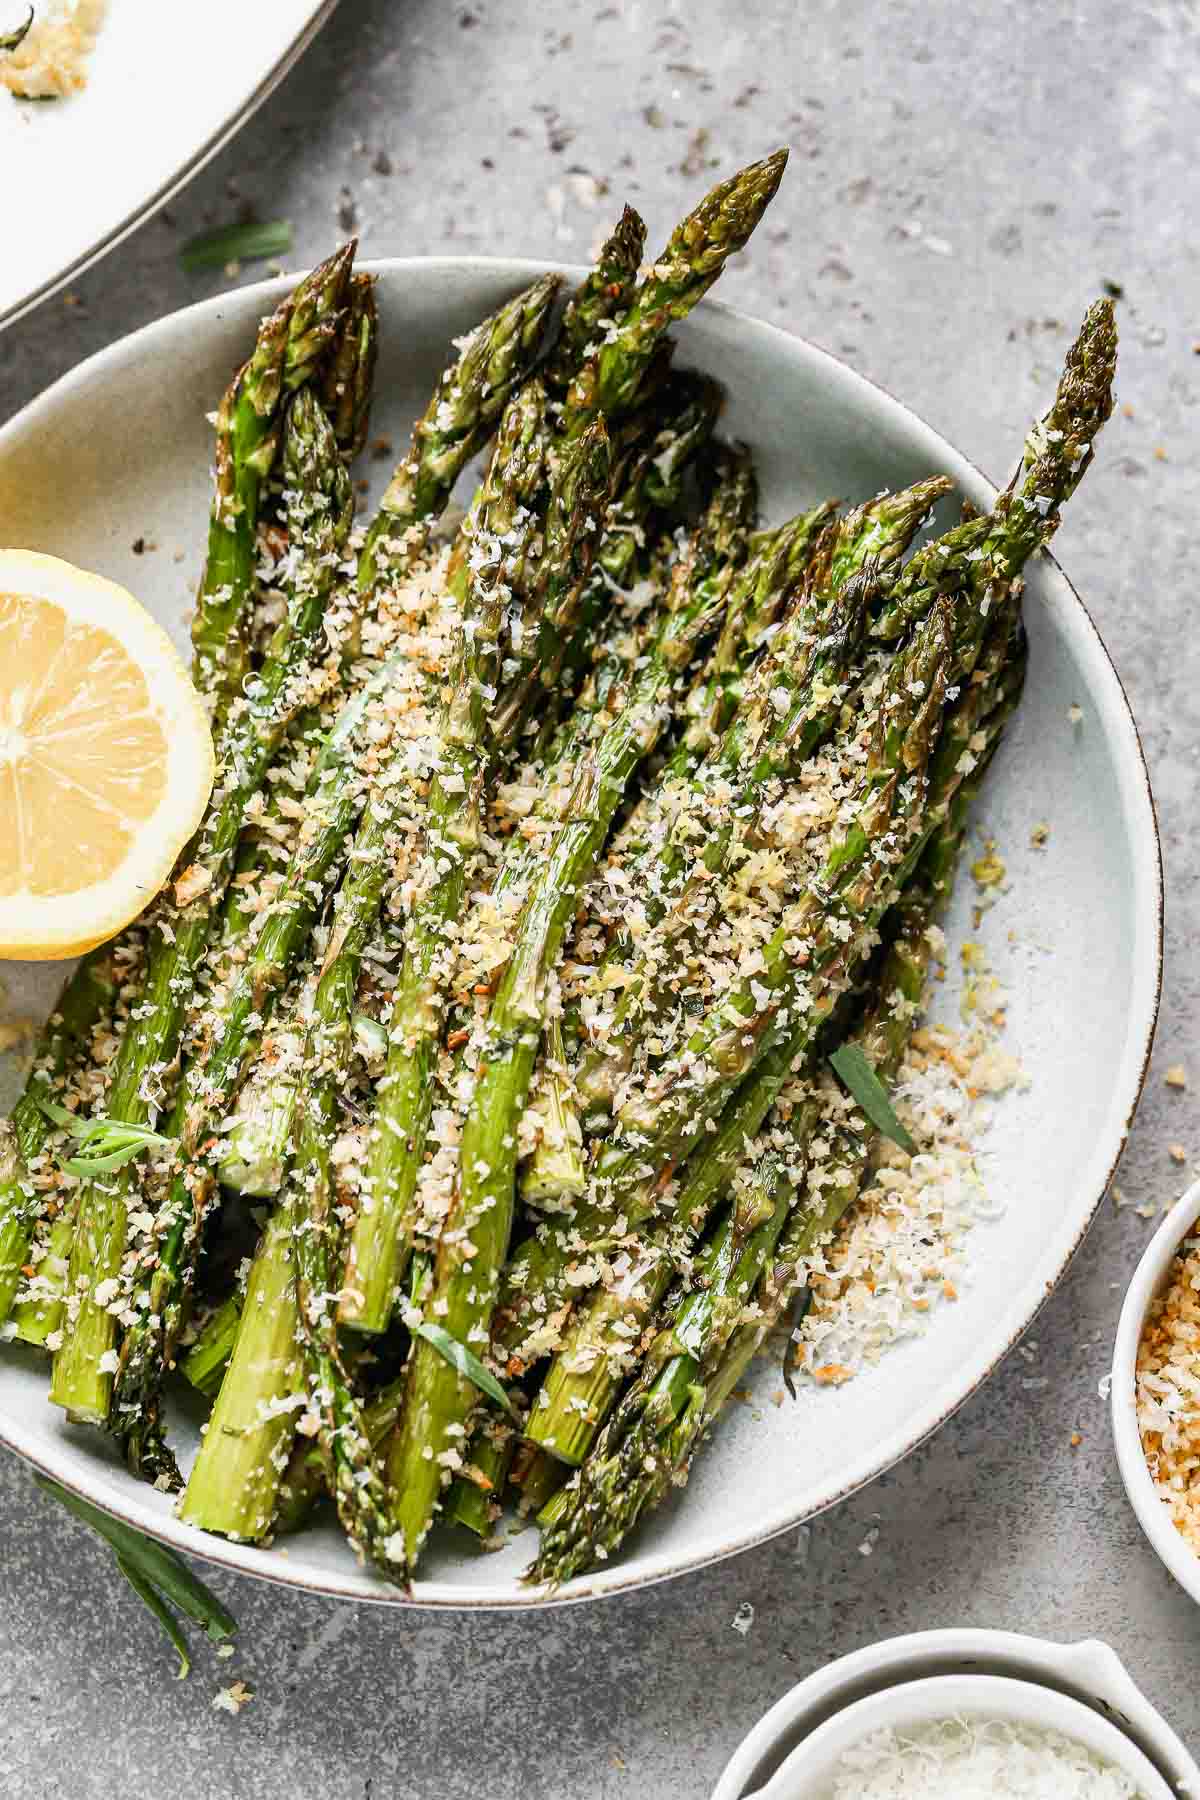 Tender and crispy on the outside with a slight bite on the inside, and covered in cheesy garlicky breadcrumbs (with hints of lemon!), our Easy Roasted Asparagus with Breadcrumbs is the perfect way to up your roasted veggie game this spring. Make a double or triple batch to feed a crowd, or scale it back to feed a family of four. 